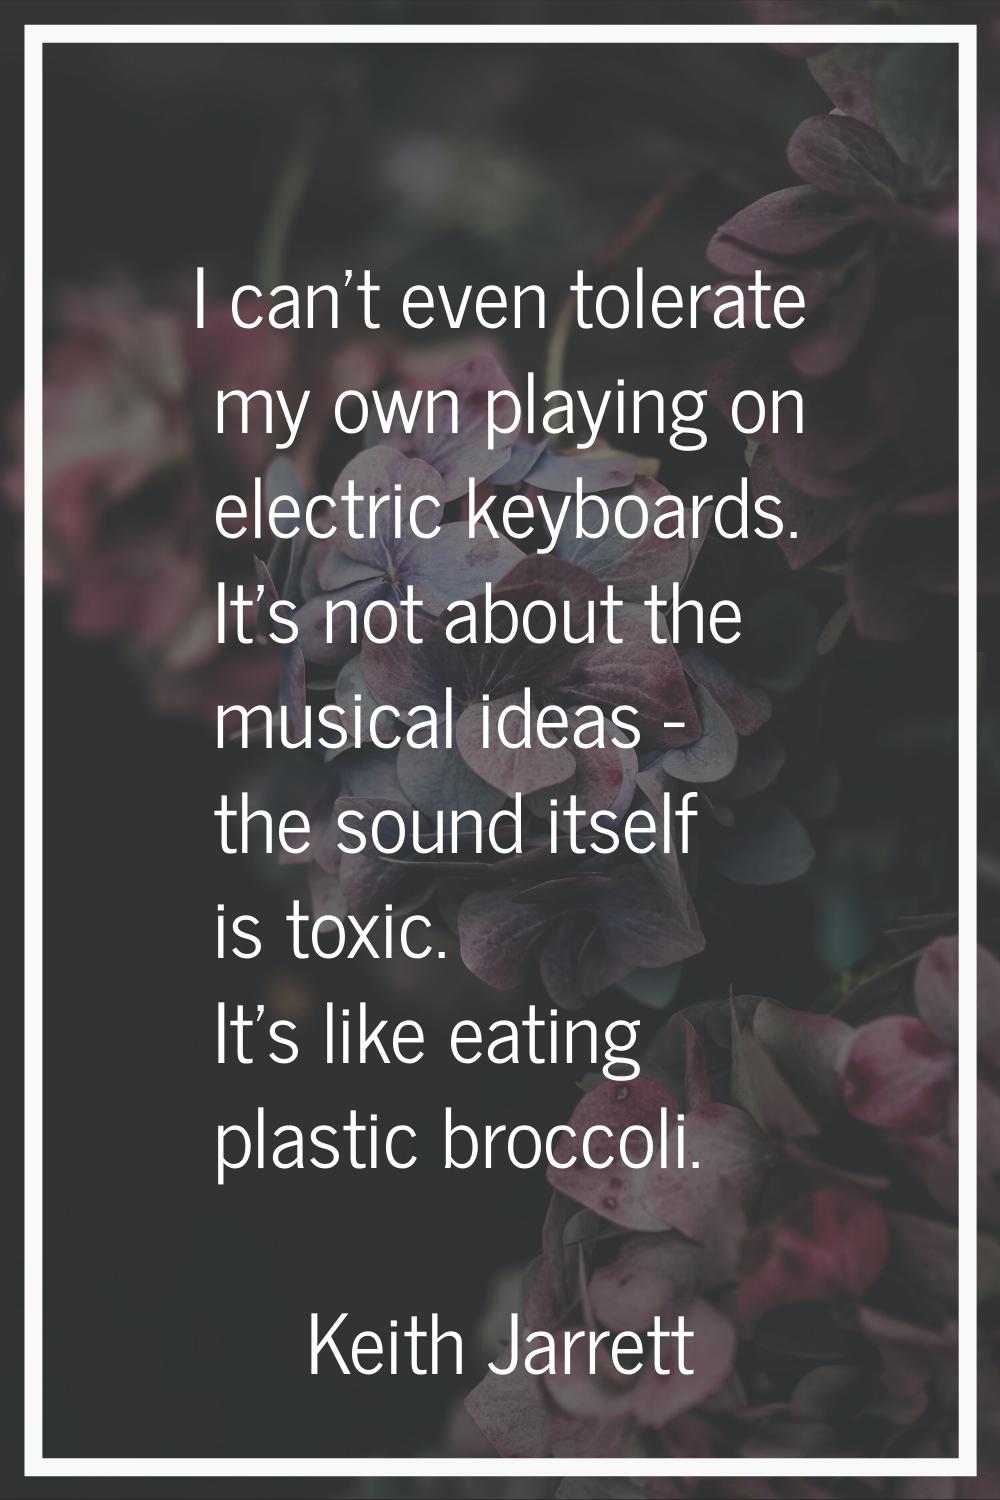 I can't even tolerate my own playing on electric keyboards. It's not about the musical ideas - the 